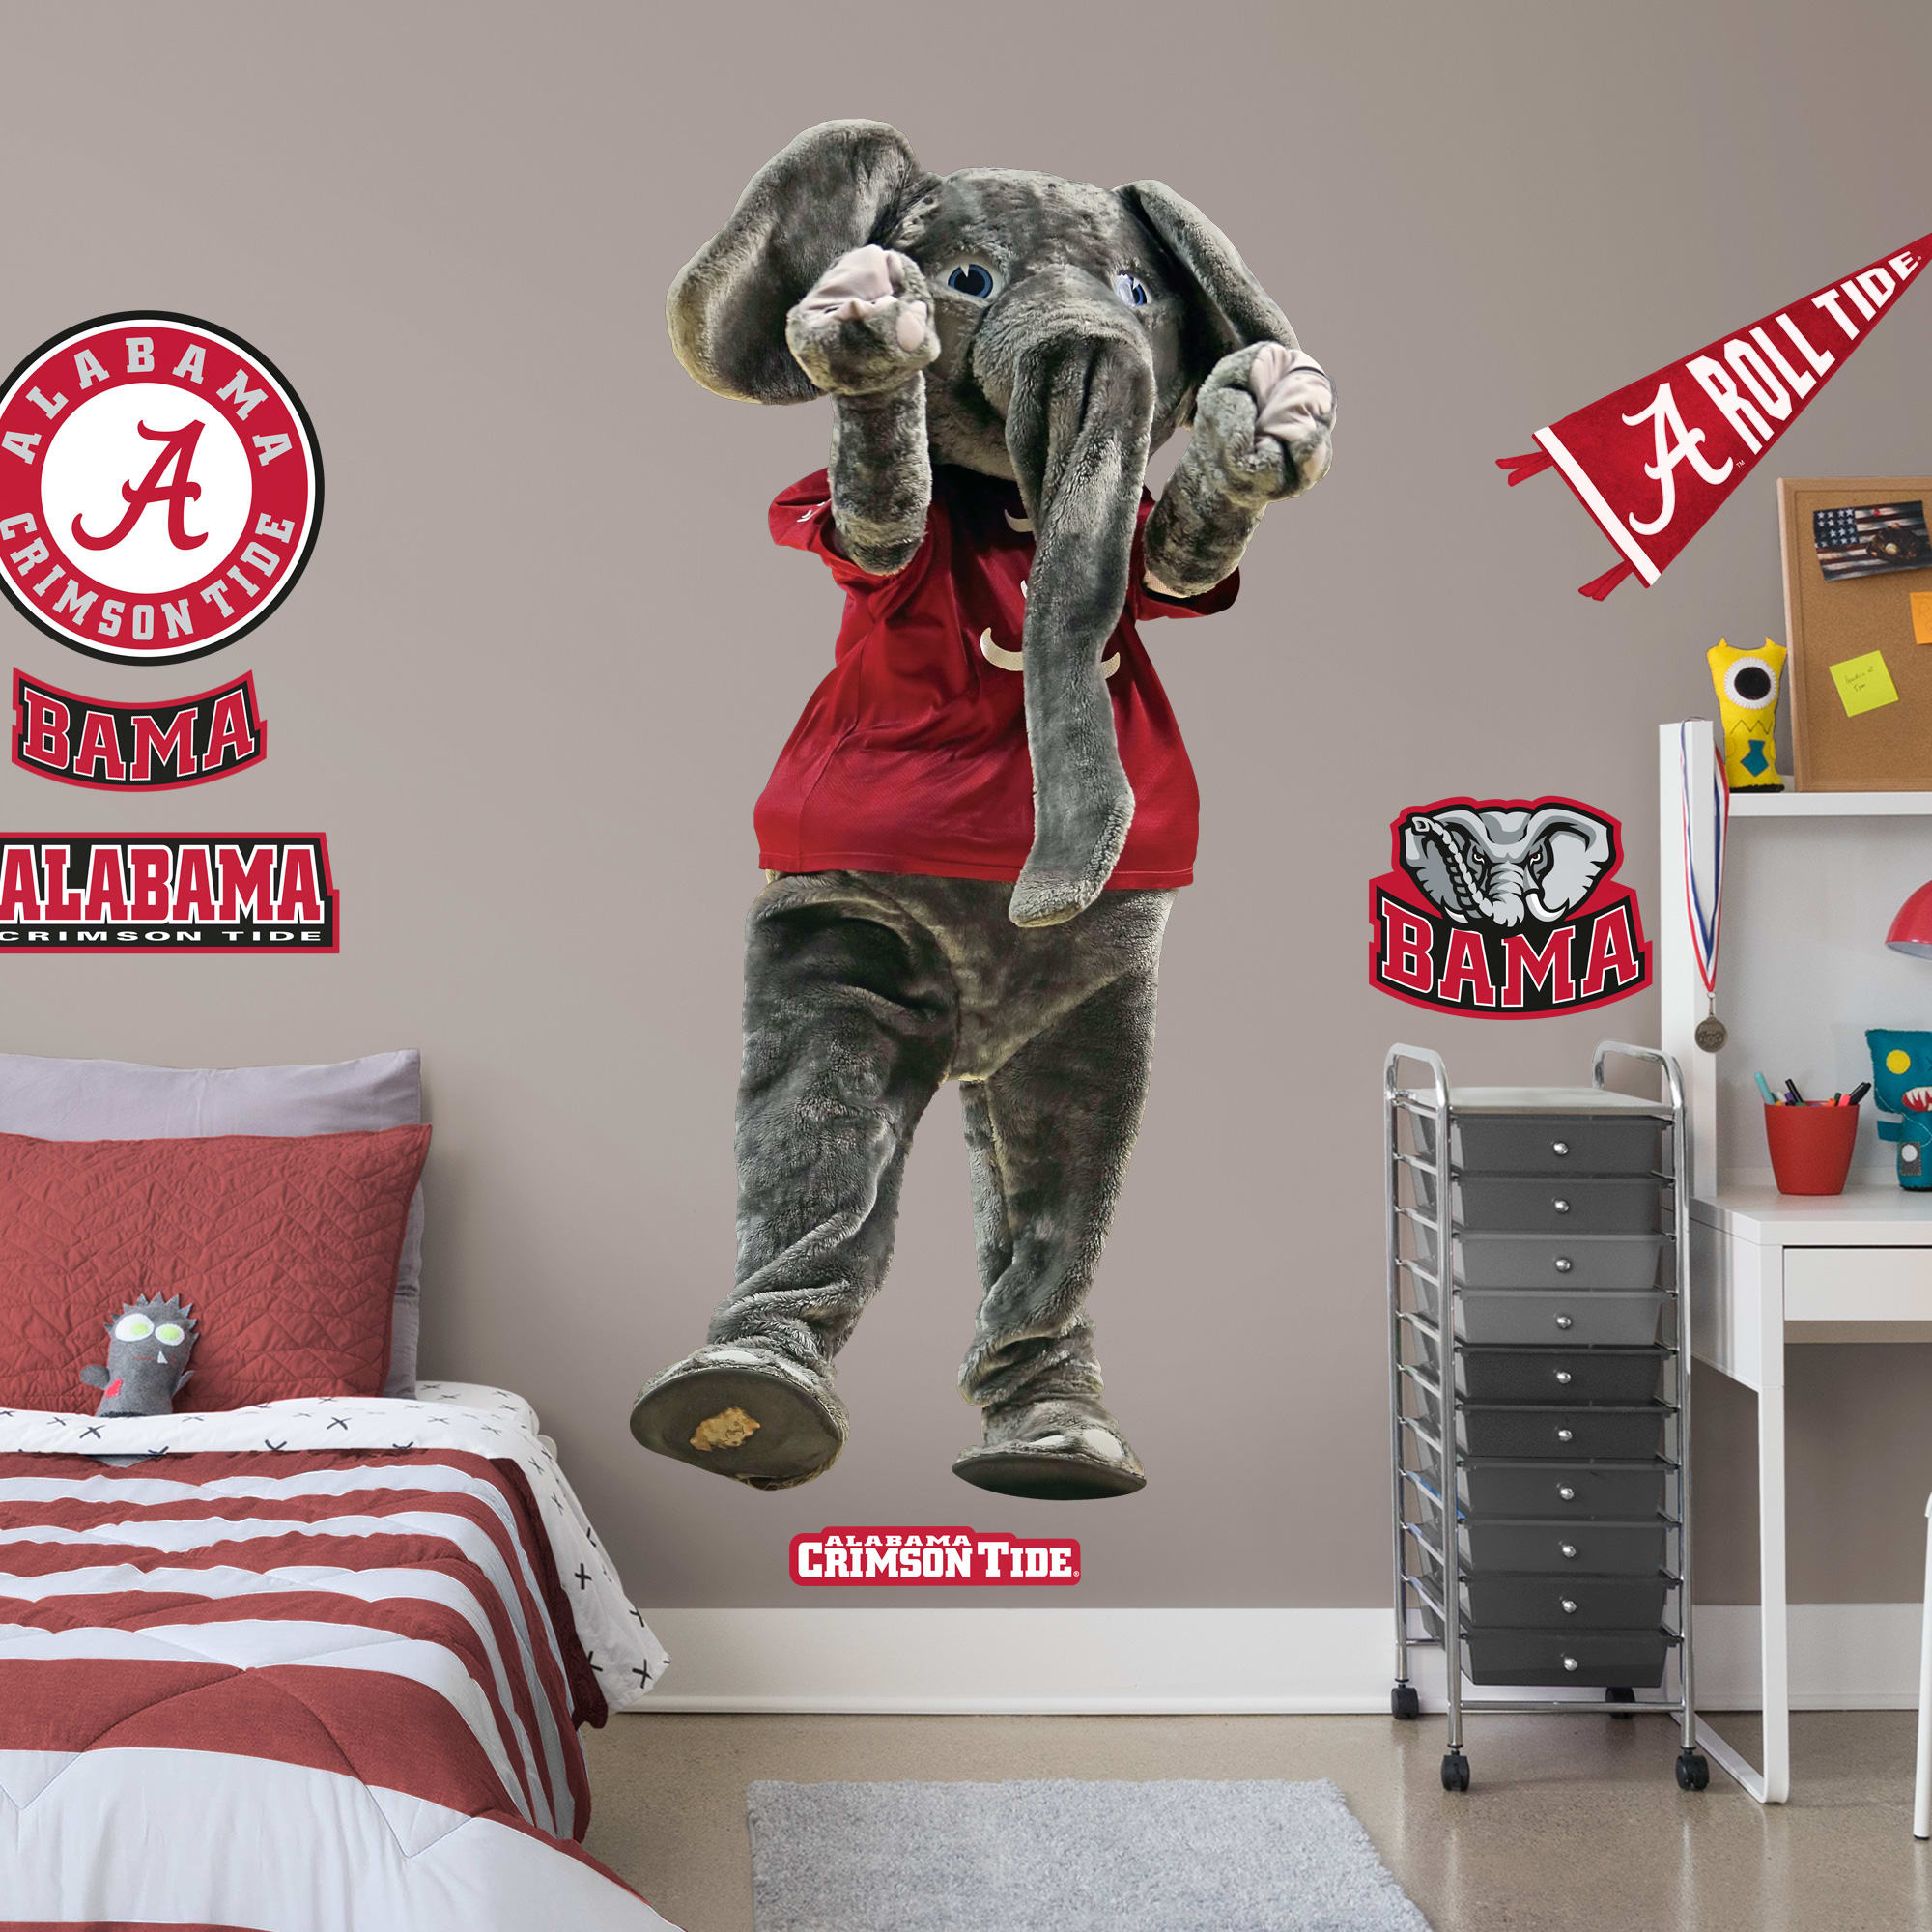 Alabama Crimson Tide: Big Al Mascot - Officially Licensed Removable Wall Decal Life-Size Mascot + 6 Decals (39"W x 77"H) by Fath